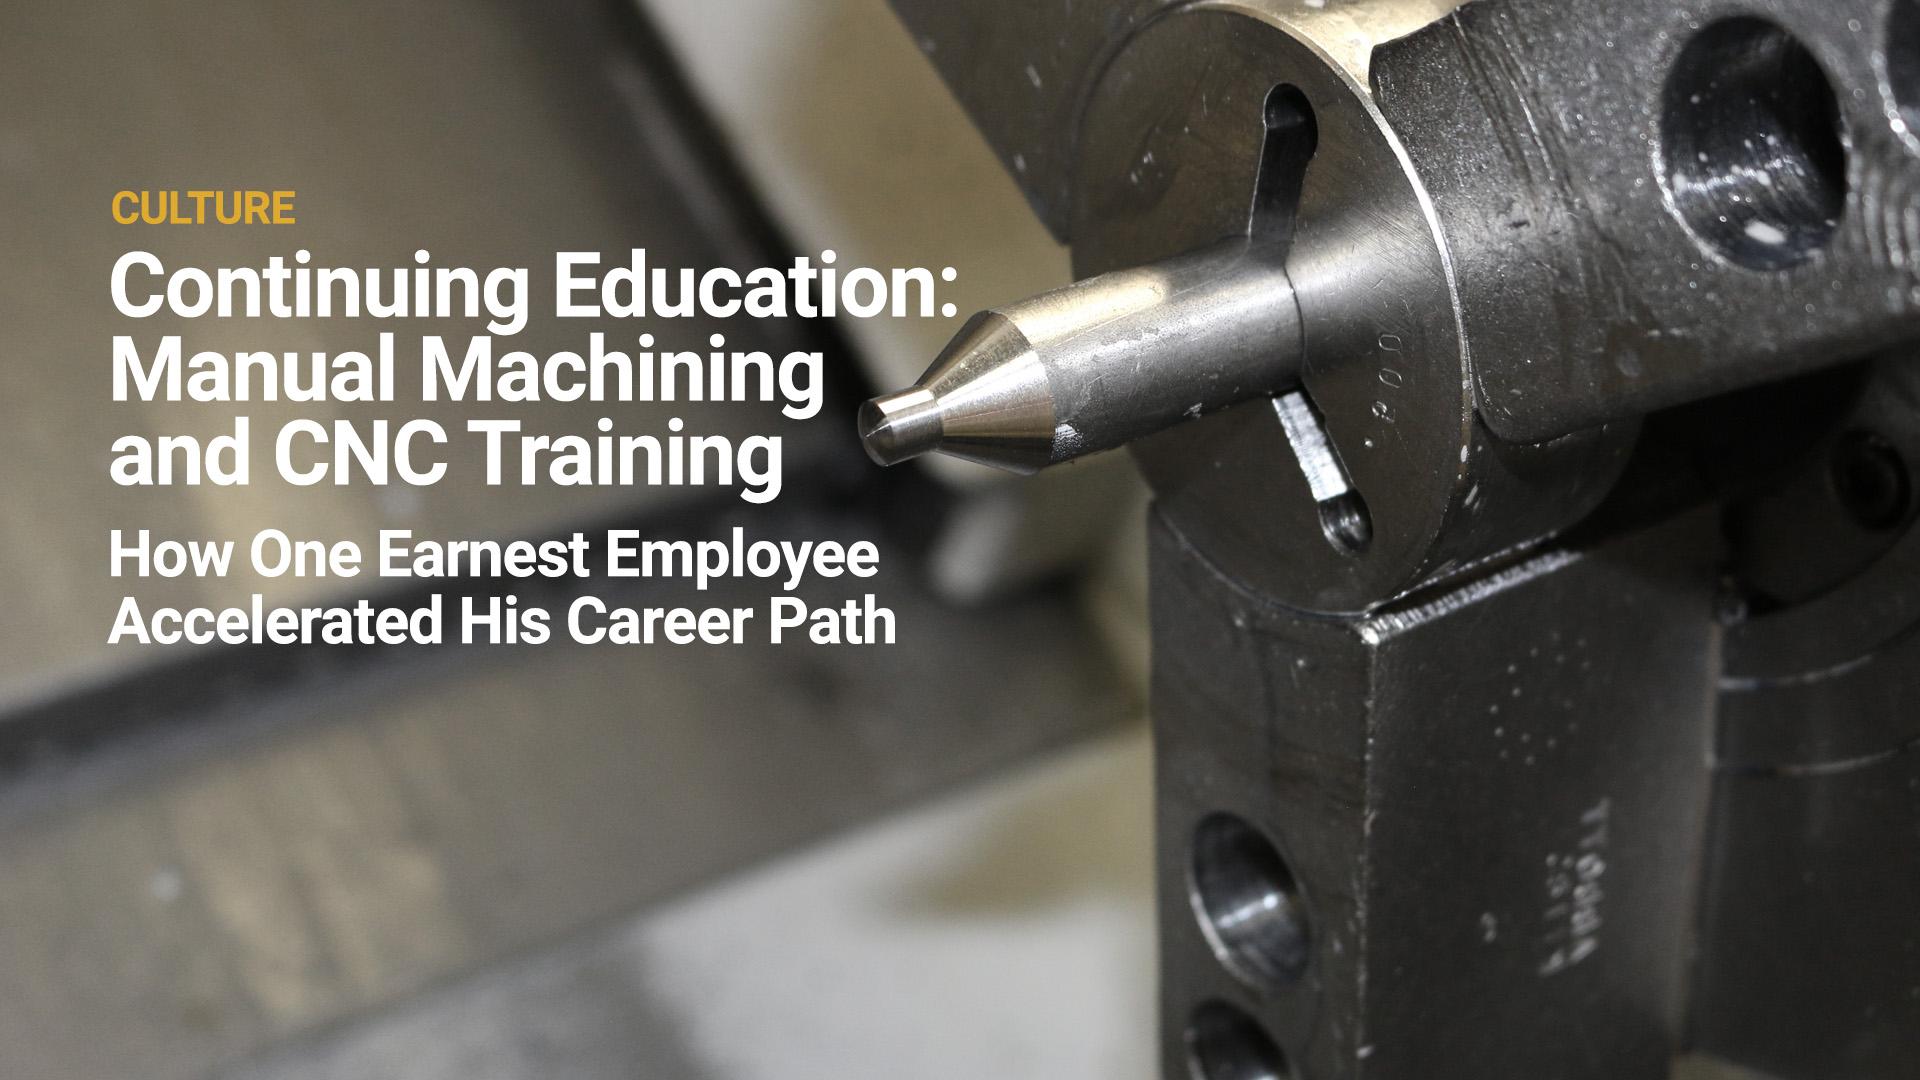 Continuing Education: Manual Machining and CNC Training